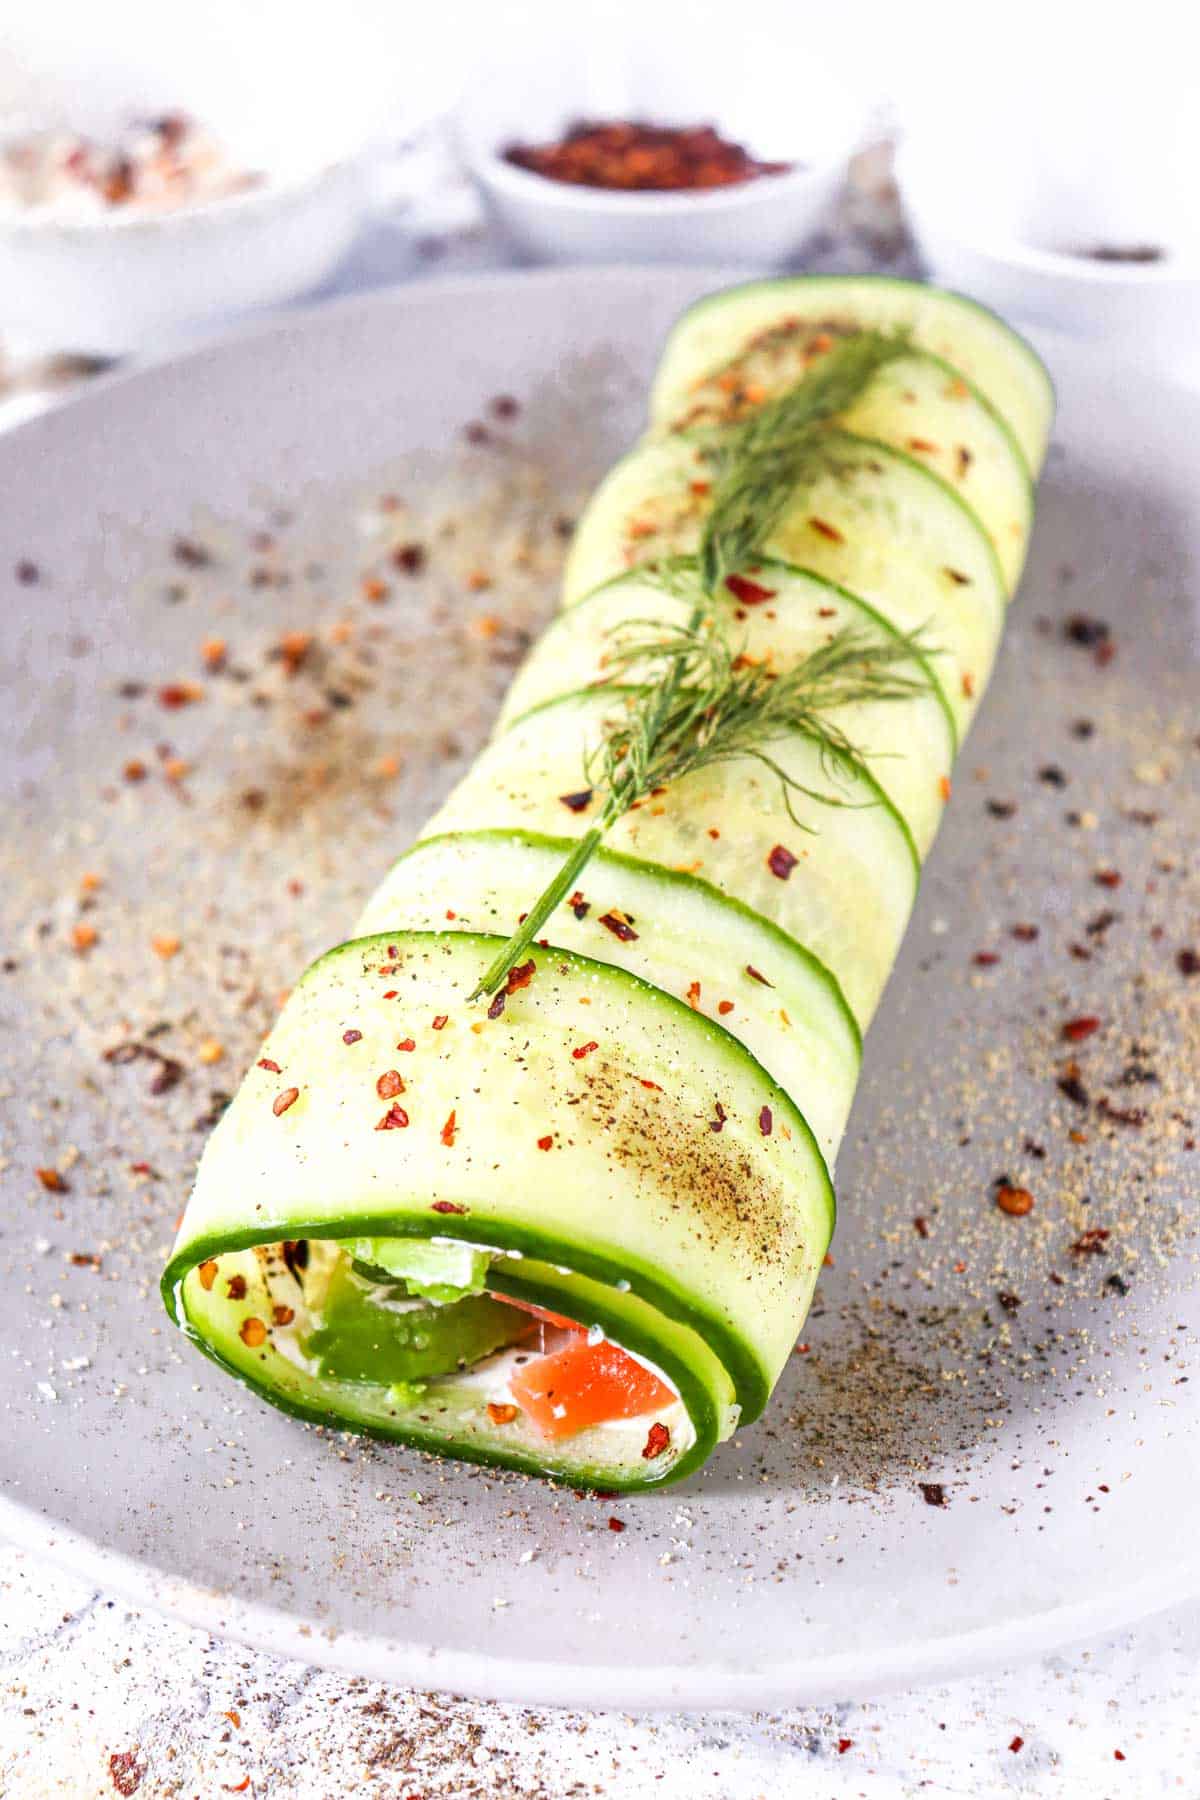 A cucumber roll filled with cream cheese and smoked salmon, garnished with dill and sprinkled with spices on a gray plate.